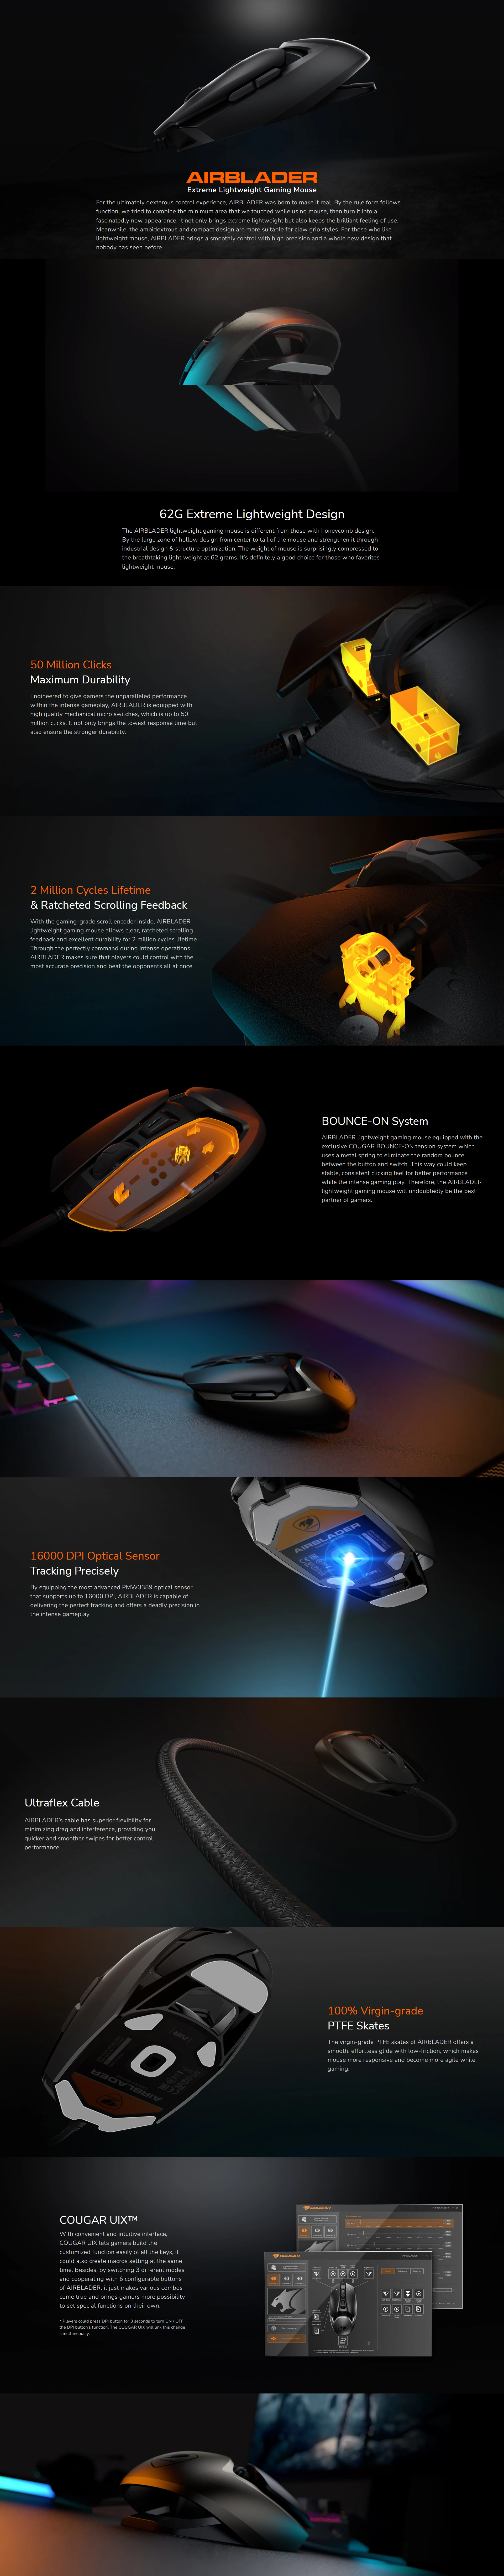 Overview - Cougar - Airblader Extreme Lightweight Gaming Mouse